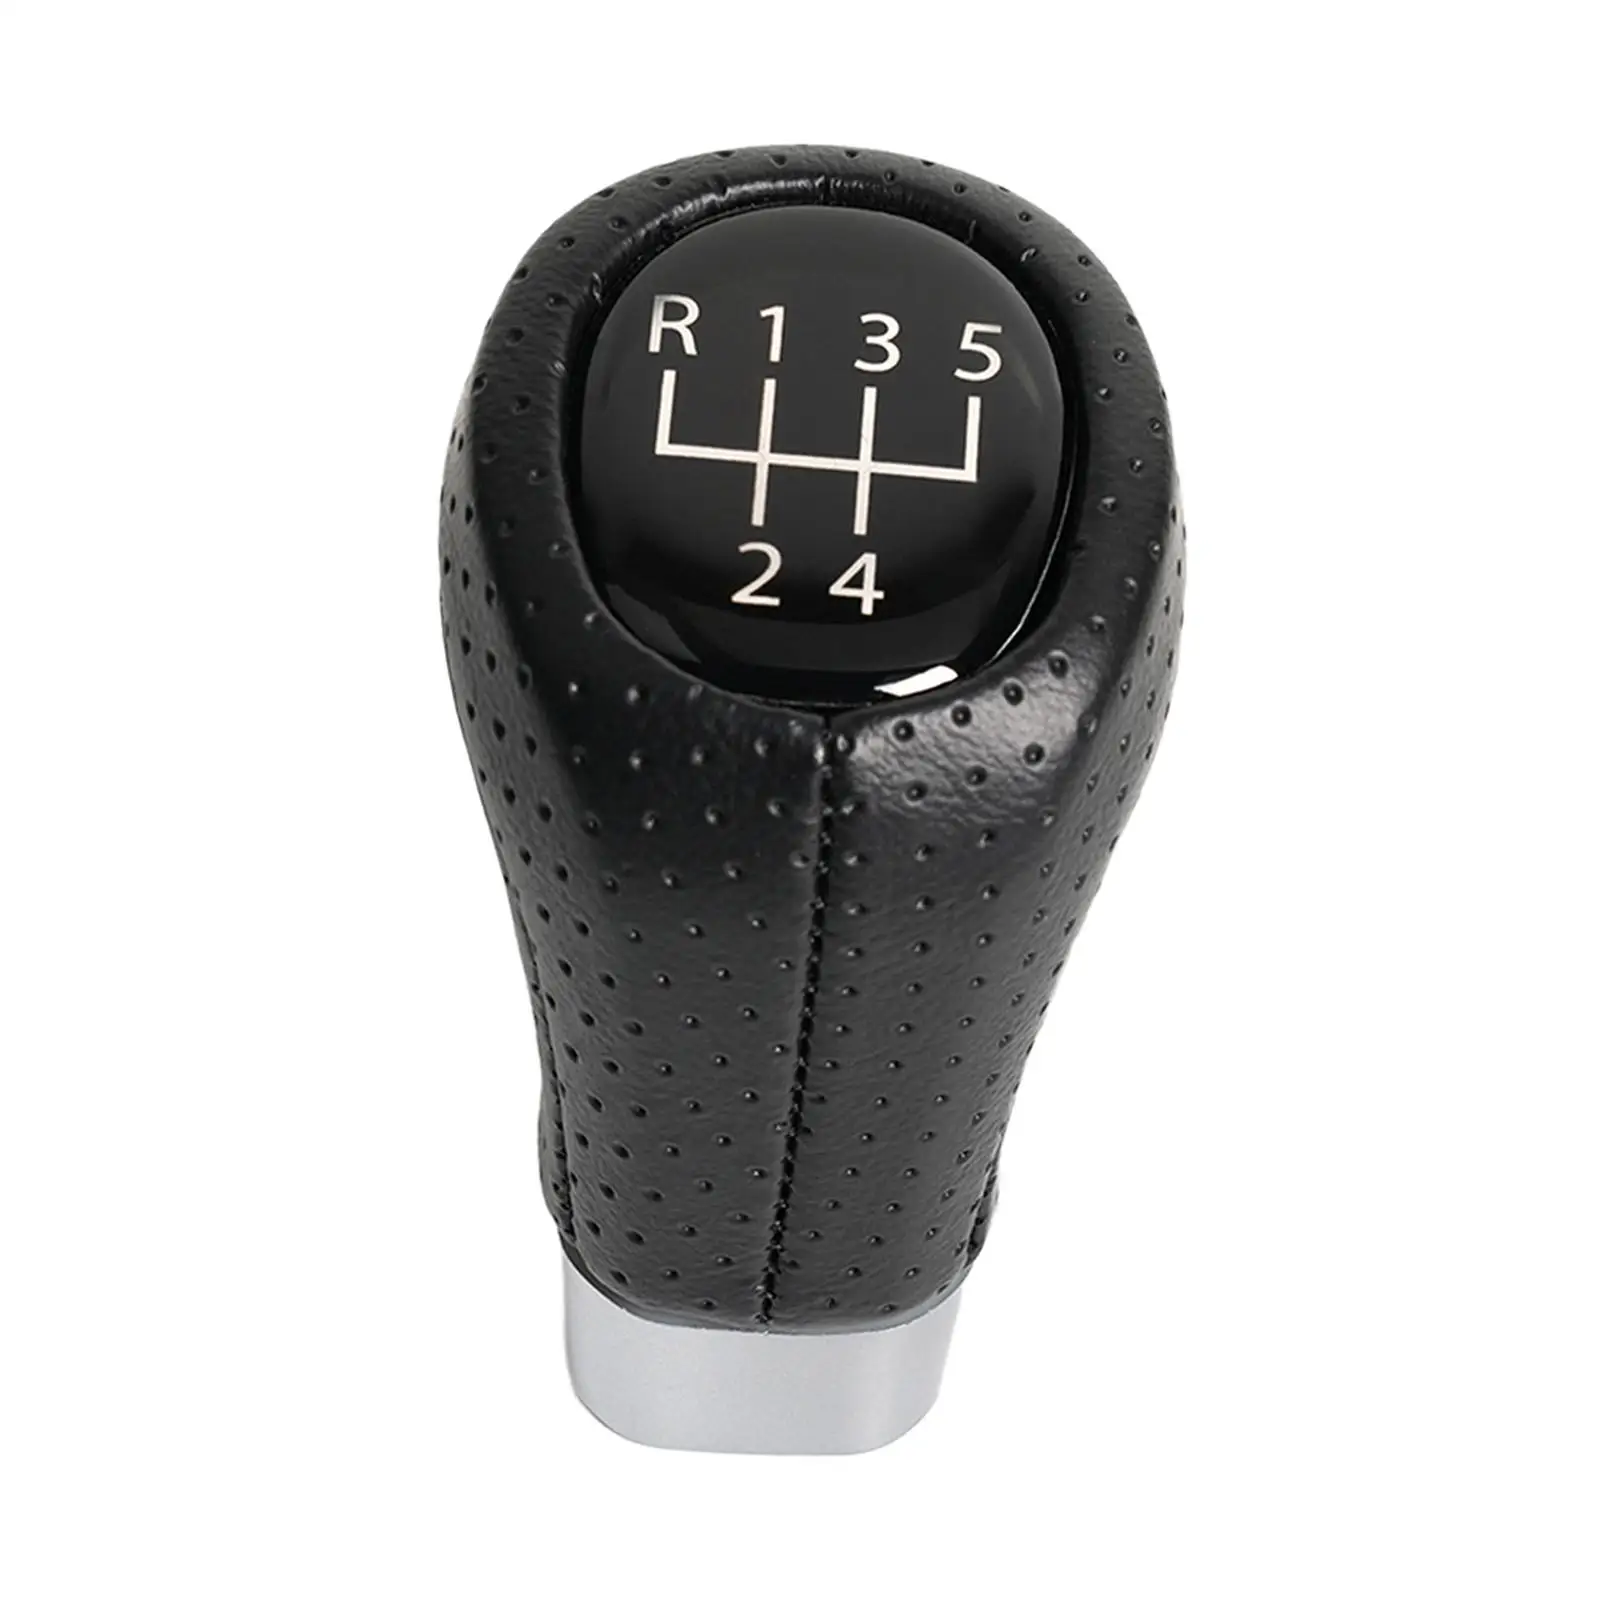 Car Gear Shift Knob Durable Easy to Install Repair Part High Performance Interior Fittings Stick Shifter Knob for BMW